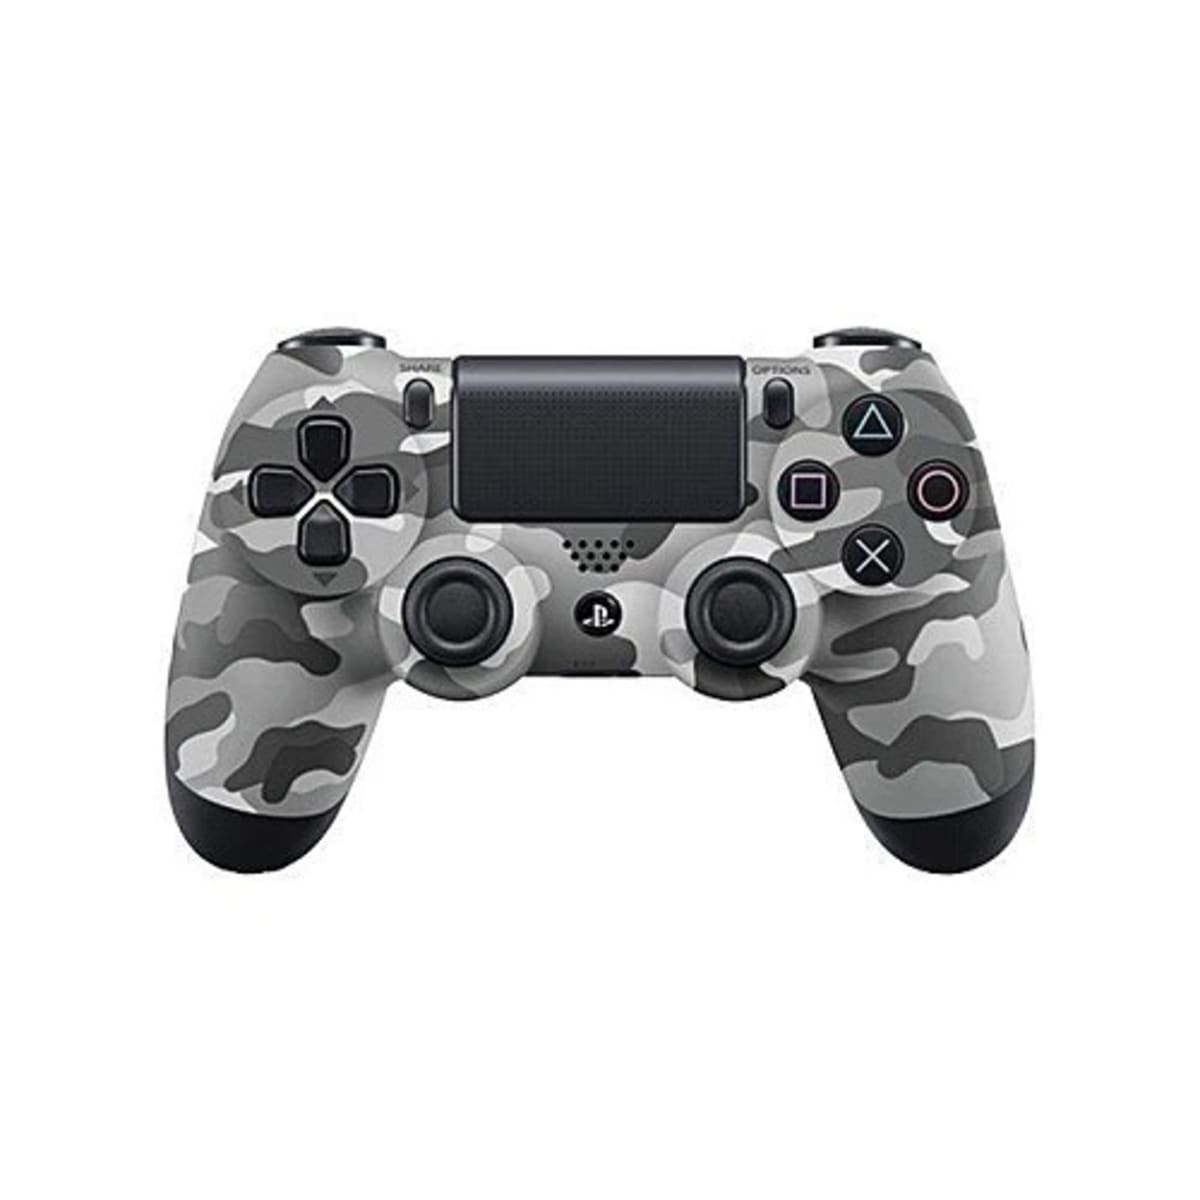 Sony Ps4 Controller Pad - Playstation 4 Dualshock 4 Wireless